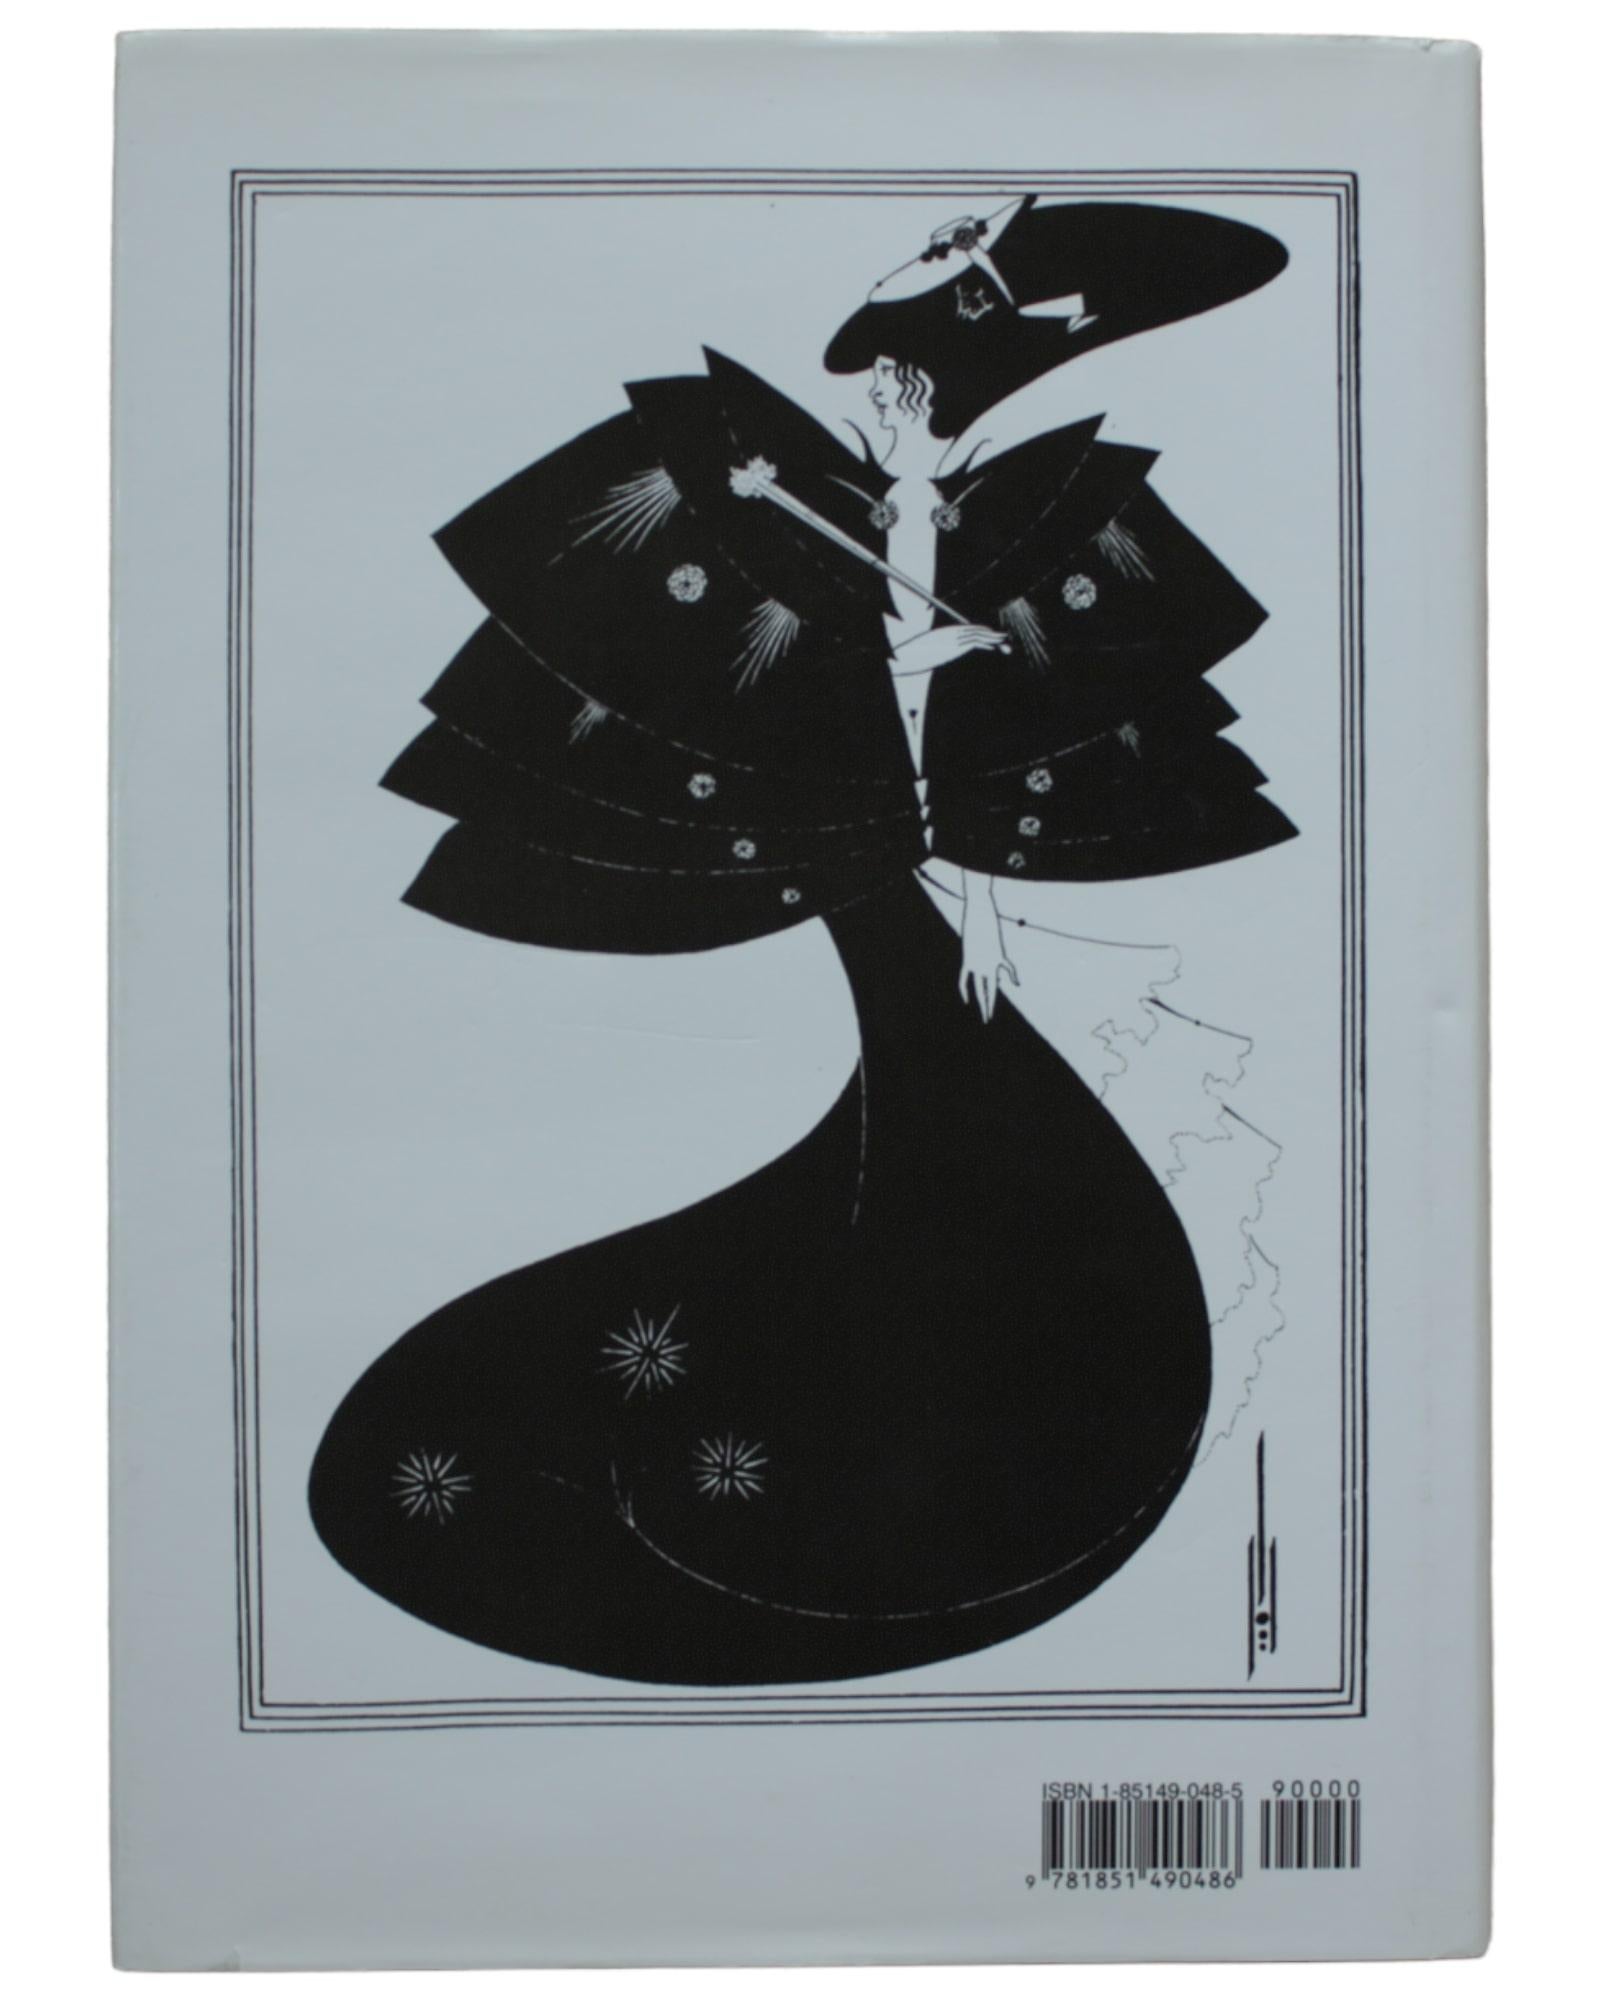 Within the pages of this captivating art book, Aubrey Beardsley's iconic illustrations come alive, showcasing his unique and provocative style that challenged societal norms and captivated the imagination of generations. Each artwork is a masterful